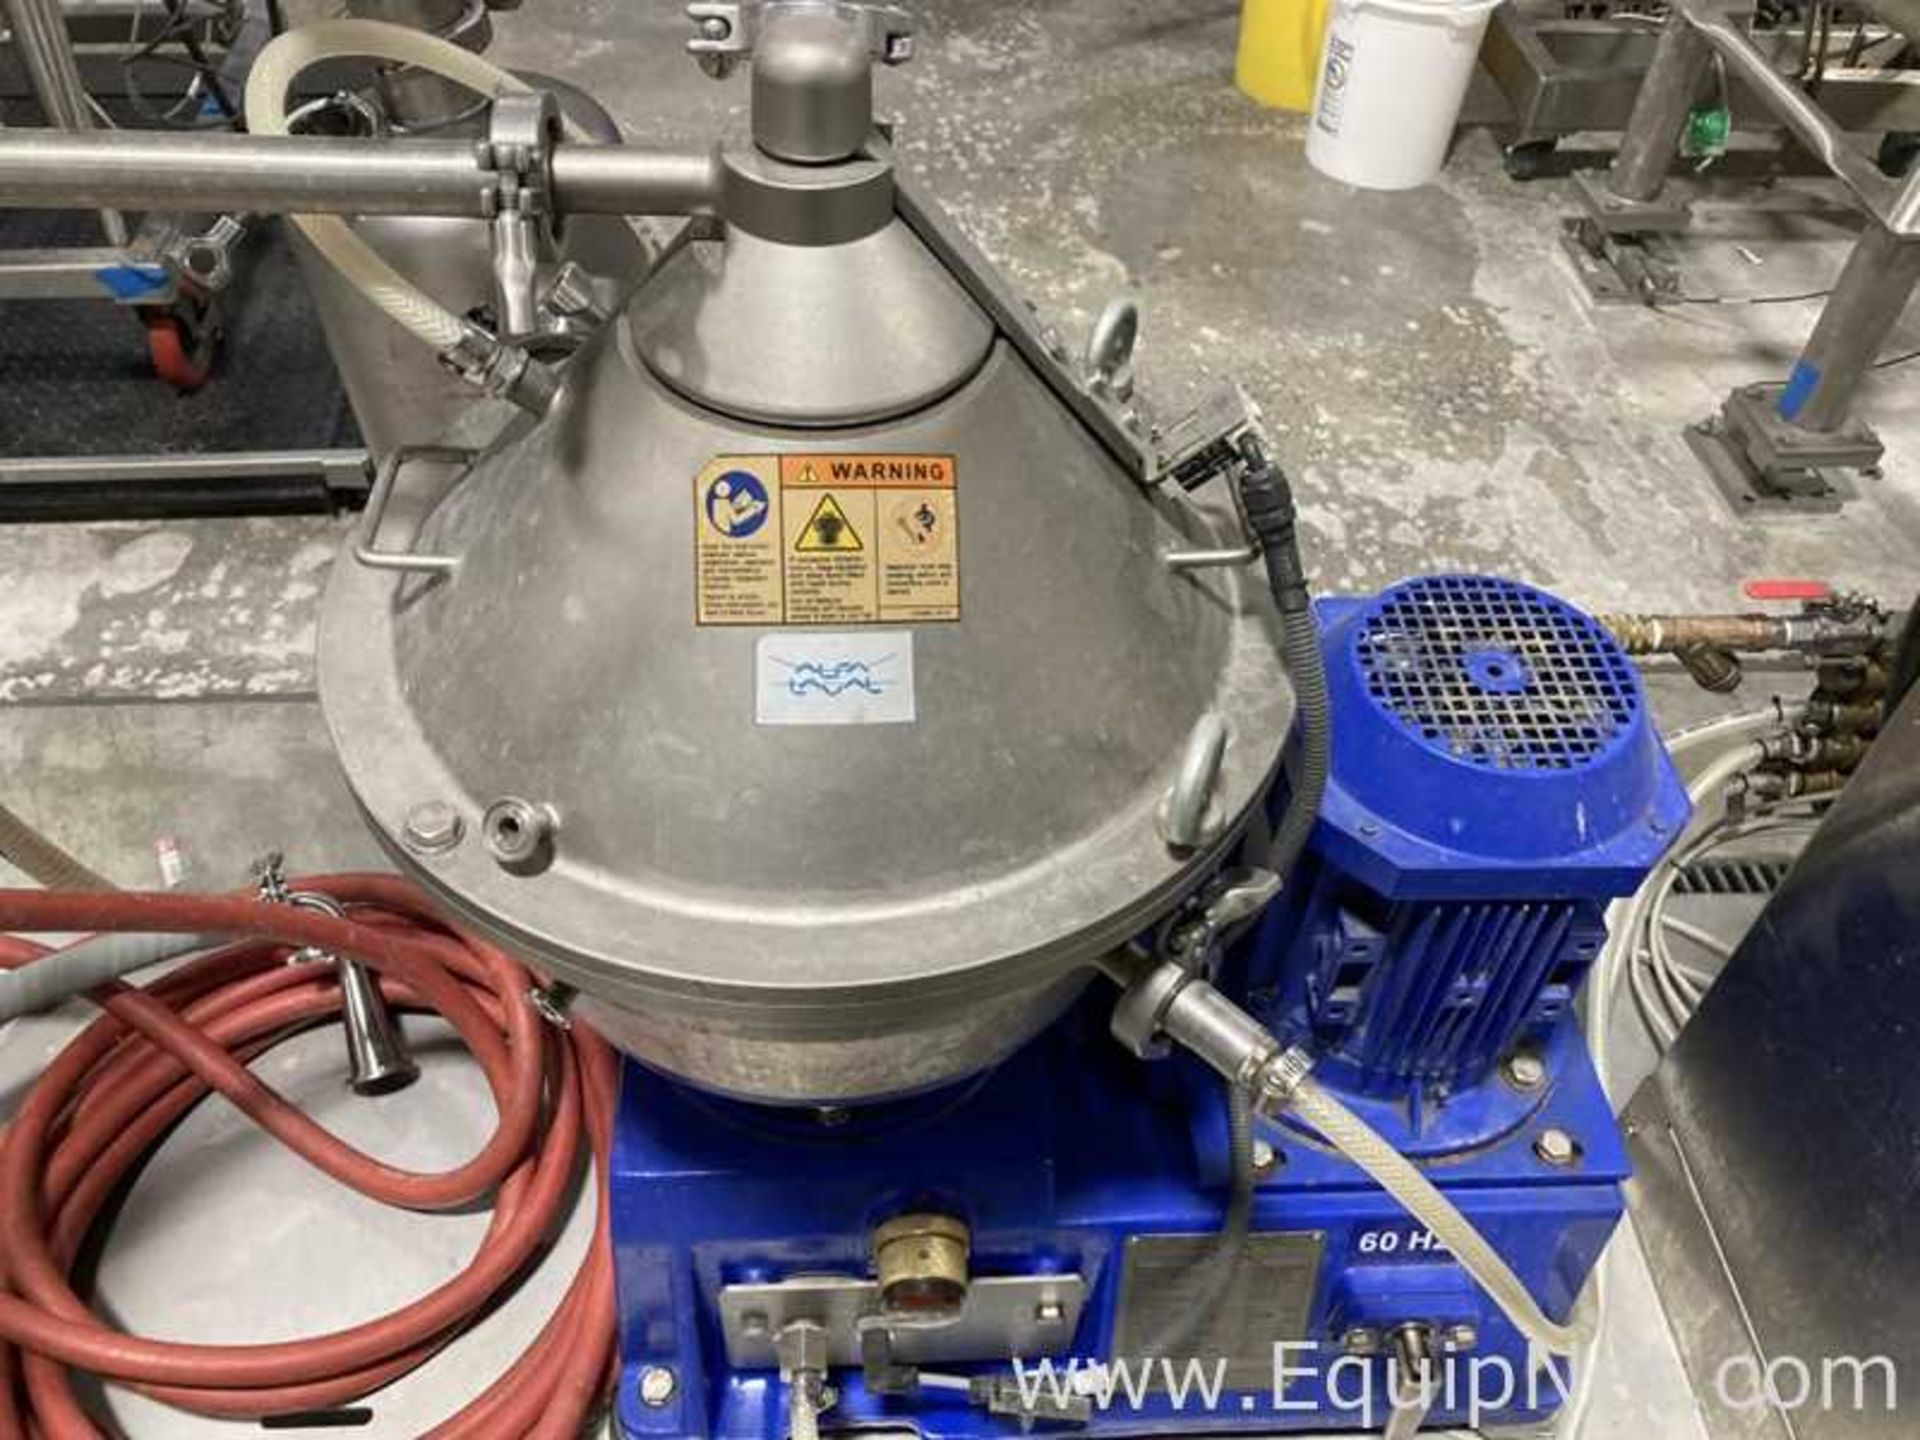 Alfa Laval LAPX 404 Stainless Steel Skid Mounted Centrifuge with Pump Cart - Image 3 of 15